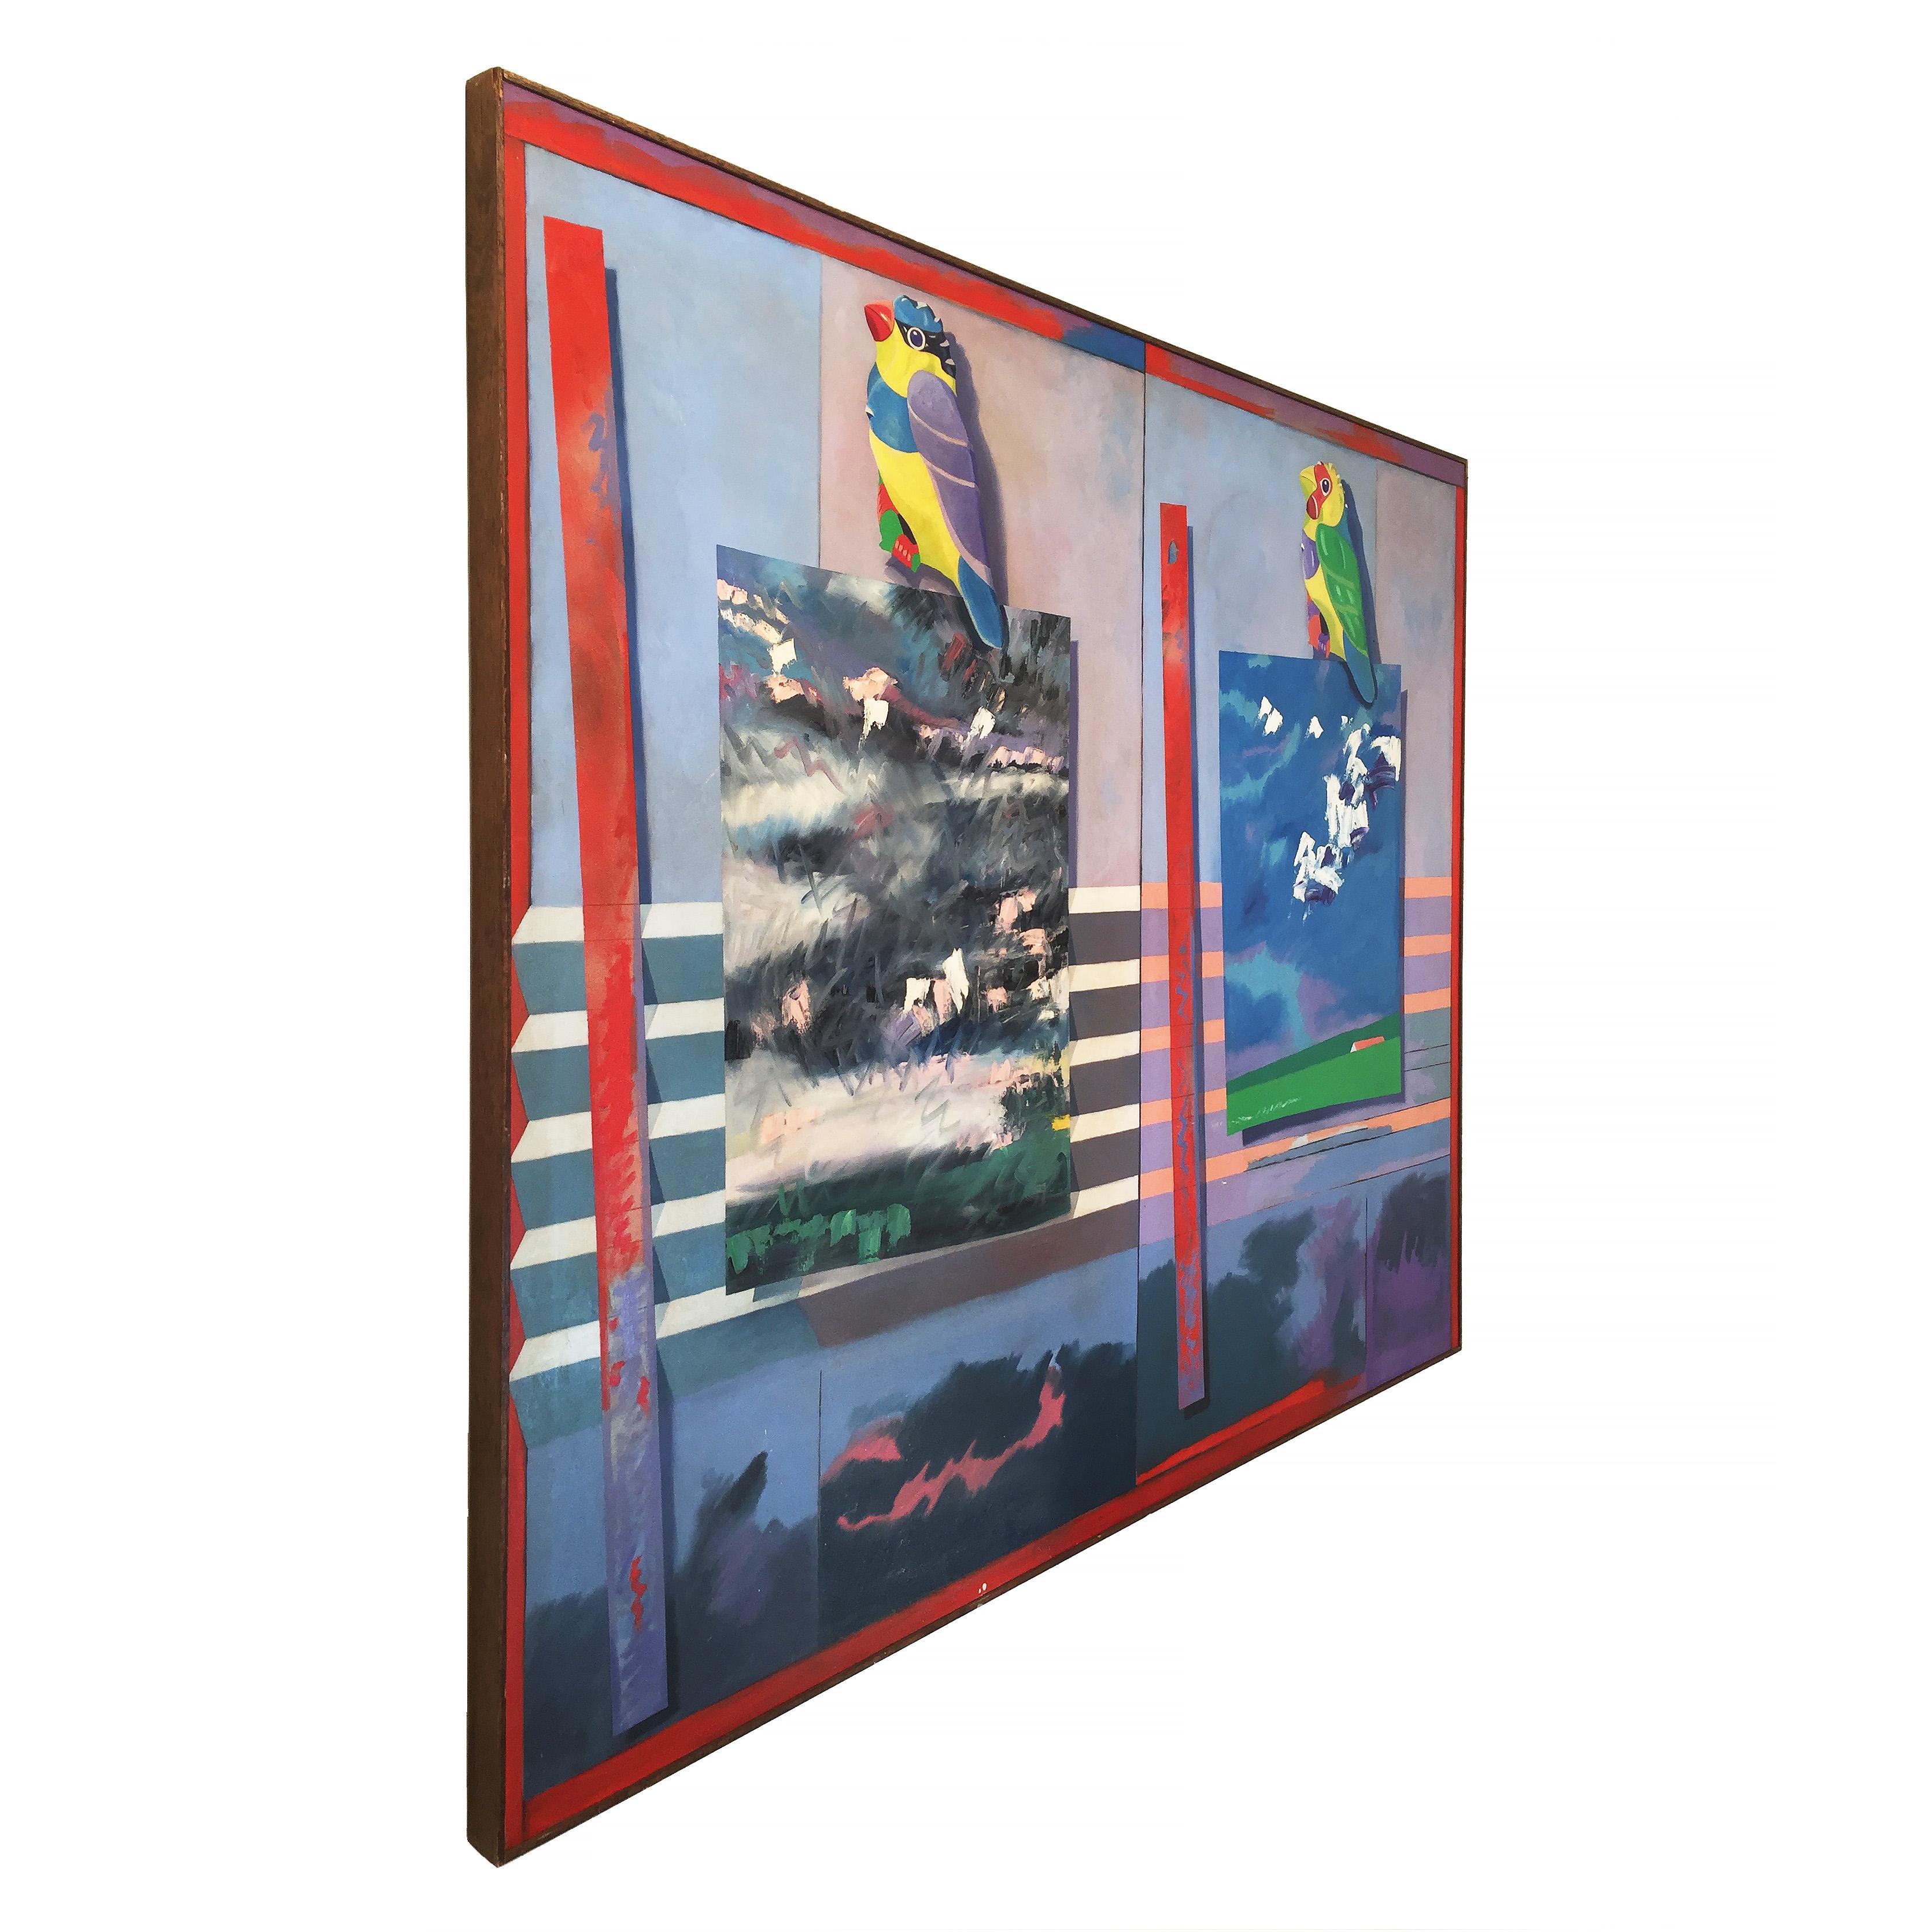 A large oil-on-canvas painting representing two exotic birds on a colourful backdrop, titled ‘Mated Measure’ and dated 1980. The painting brings two birds into life from two weather snapshots, one cloudy and one sunny. This painting is the epitome